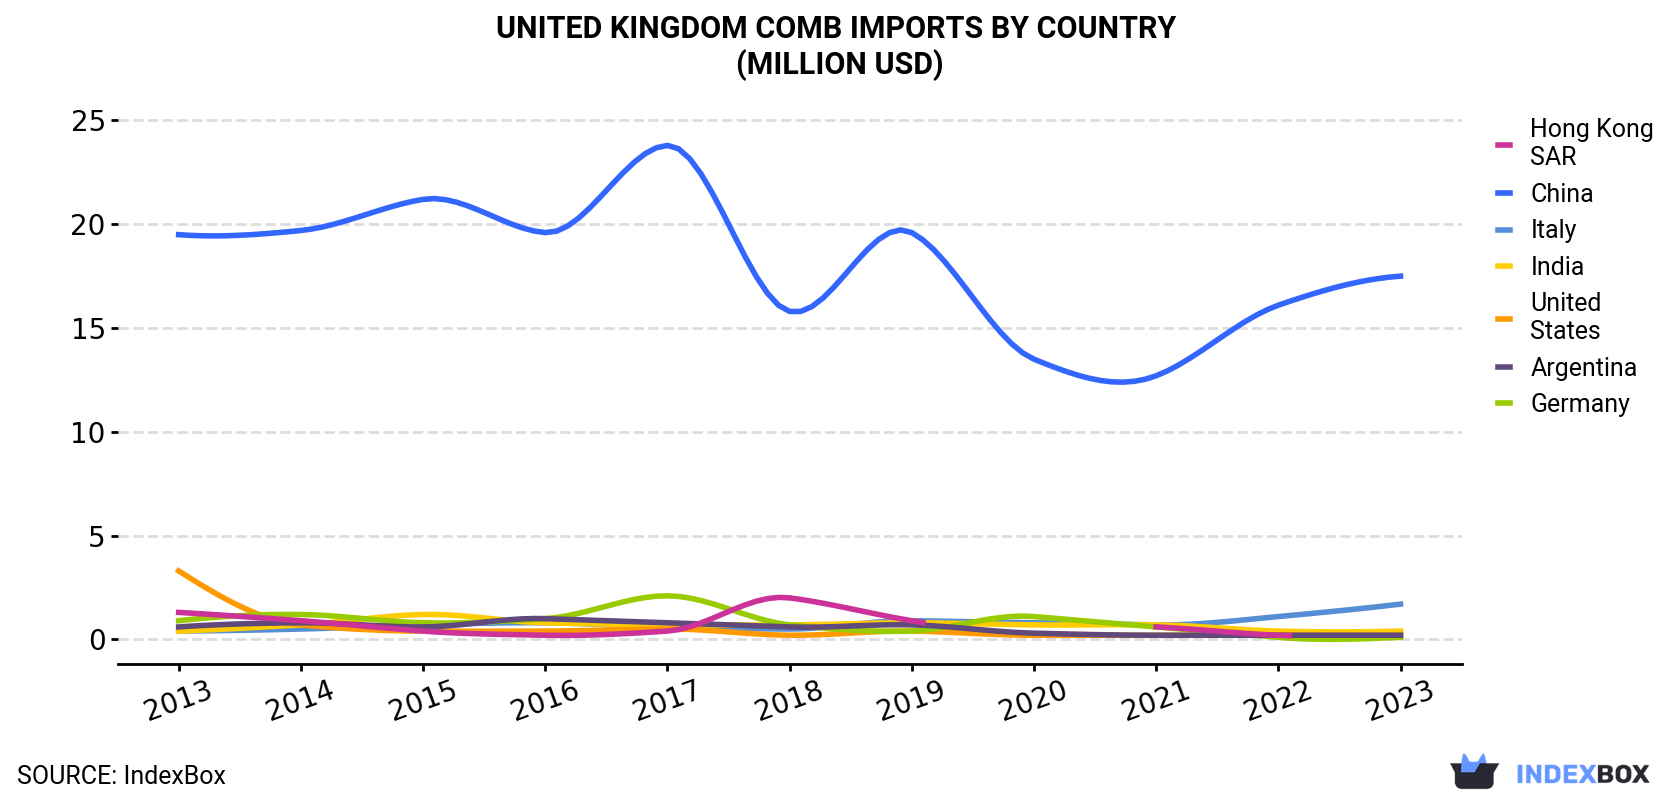 United Kingdom Comb Imports By Country (Million USD)